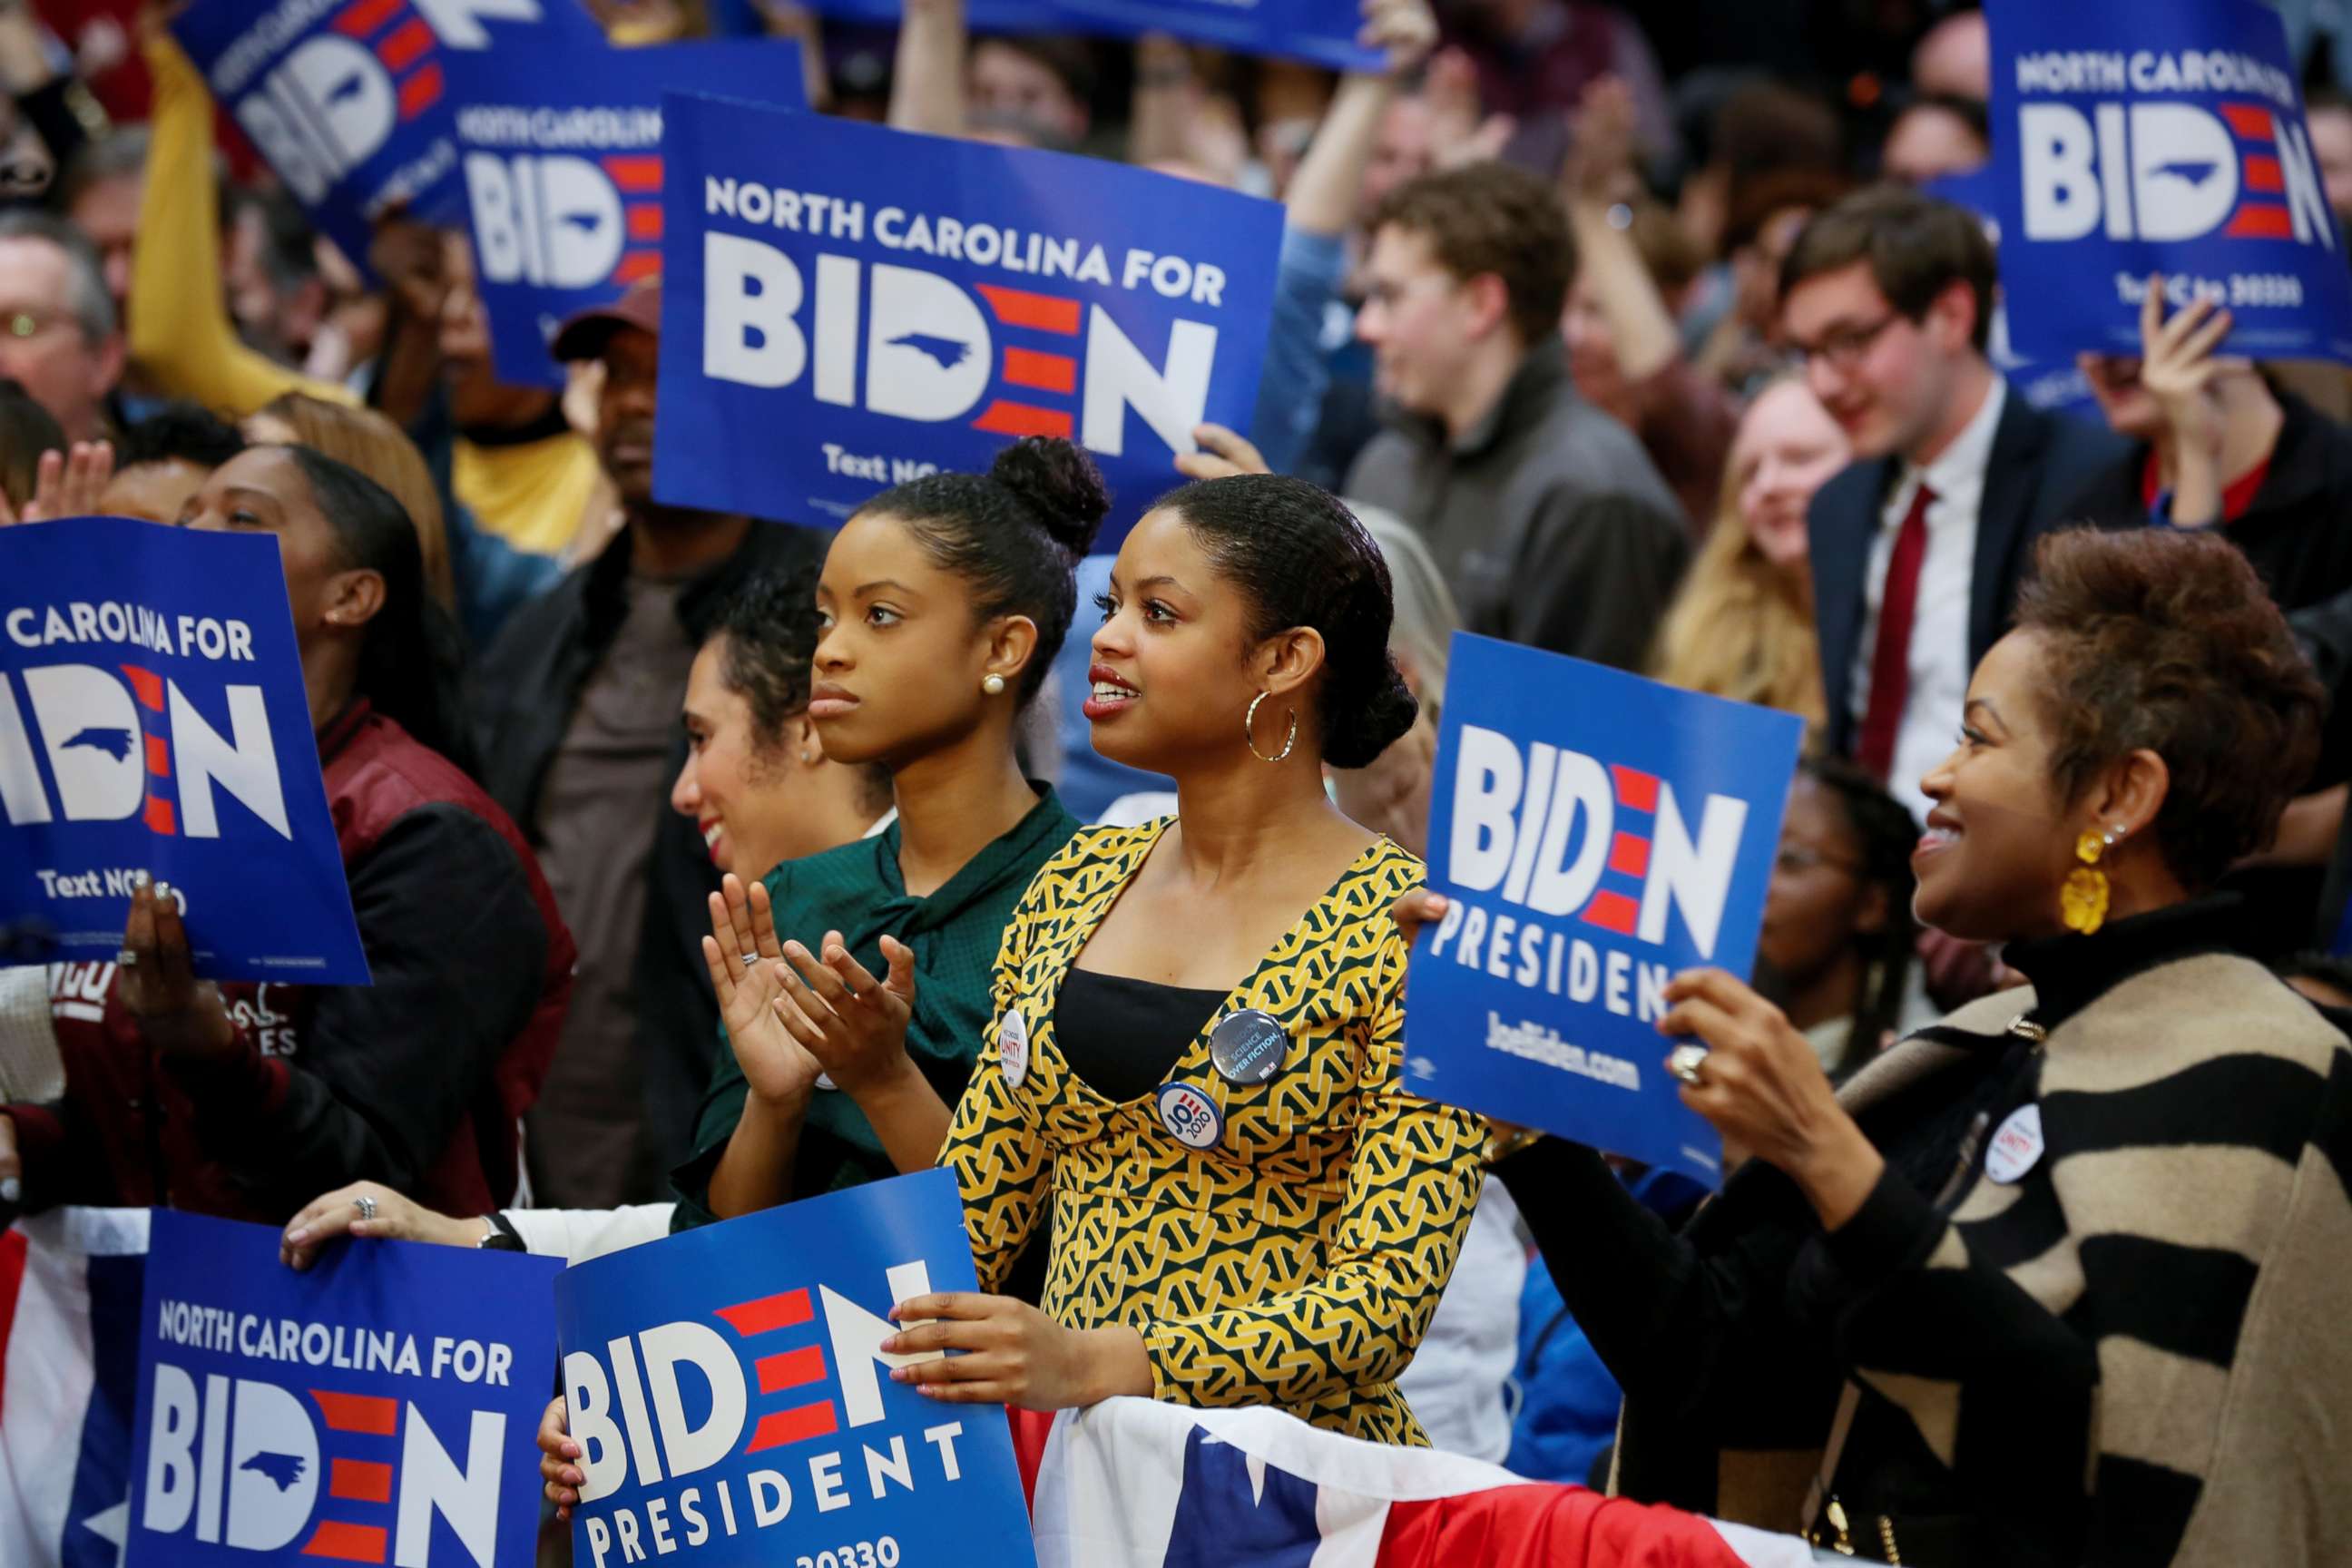 PHOTO: People wave campaign signs during an event with Democratic presidential candidate and former U.S. Vice President Joe Biden at Saint Augustine's University in Raleigh, N.C., Feb. 29, 2020.